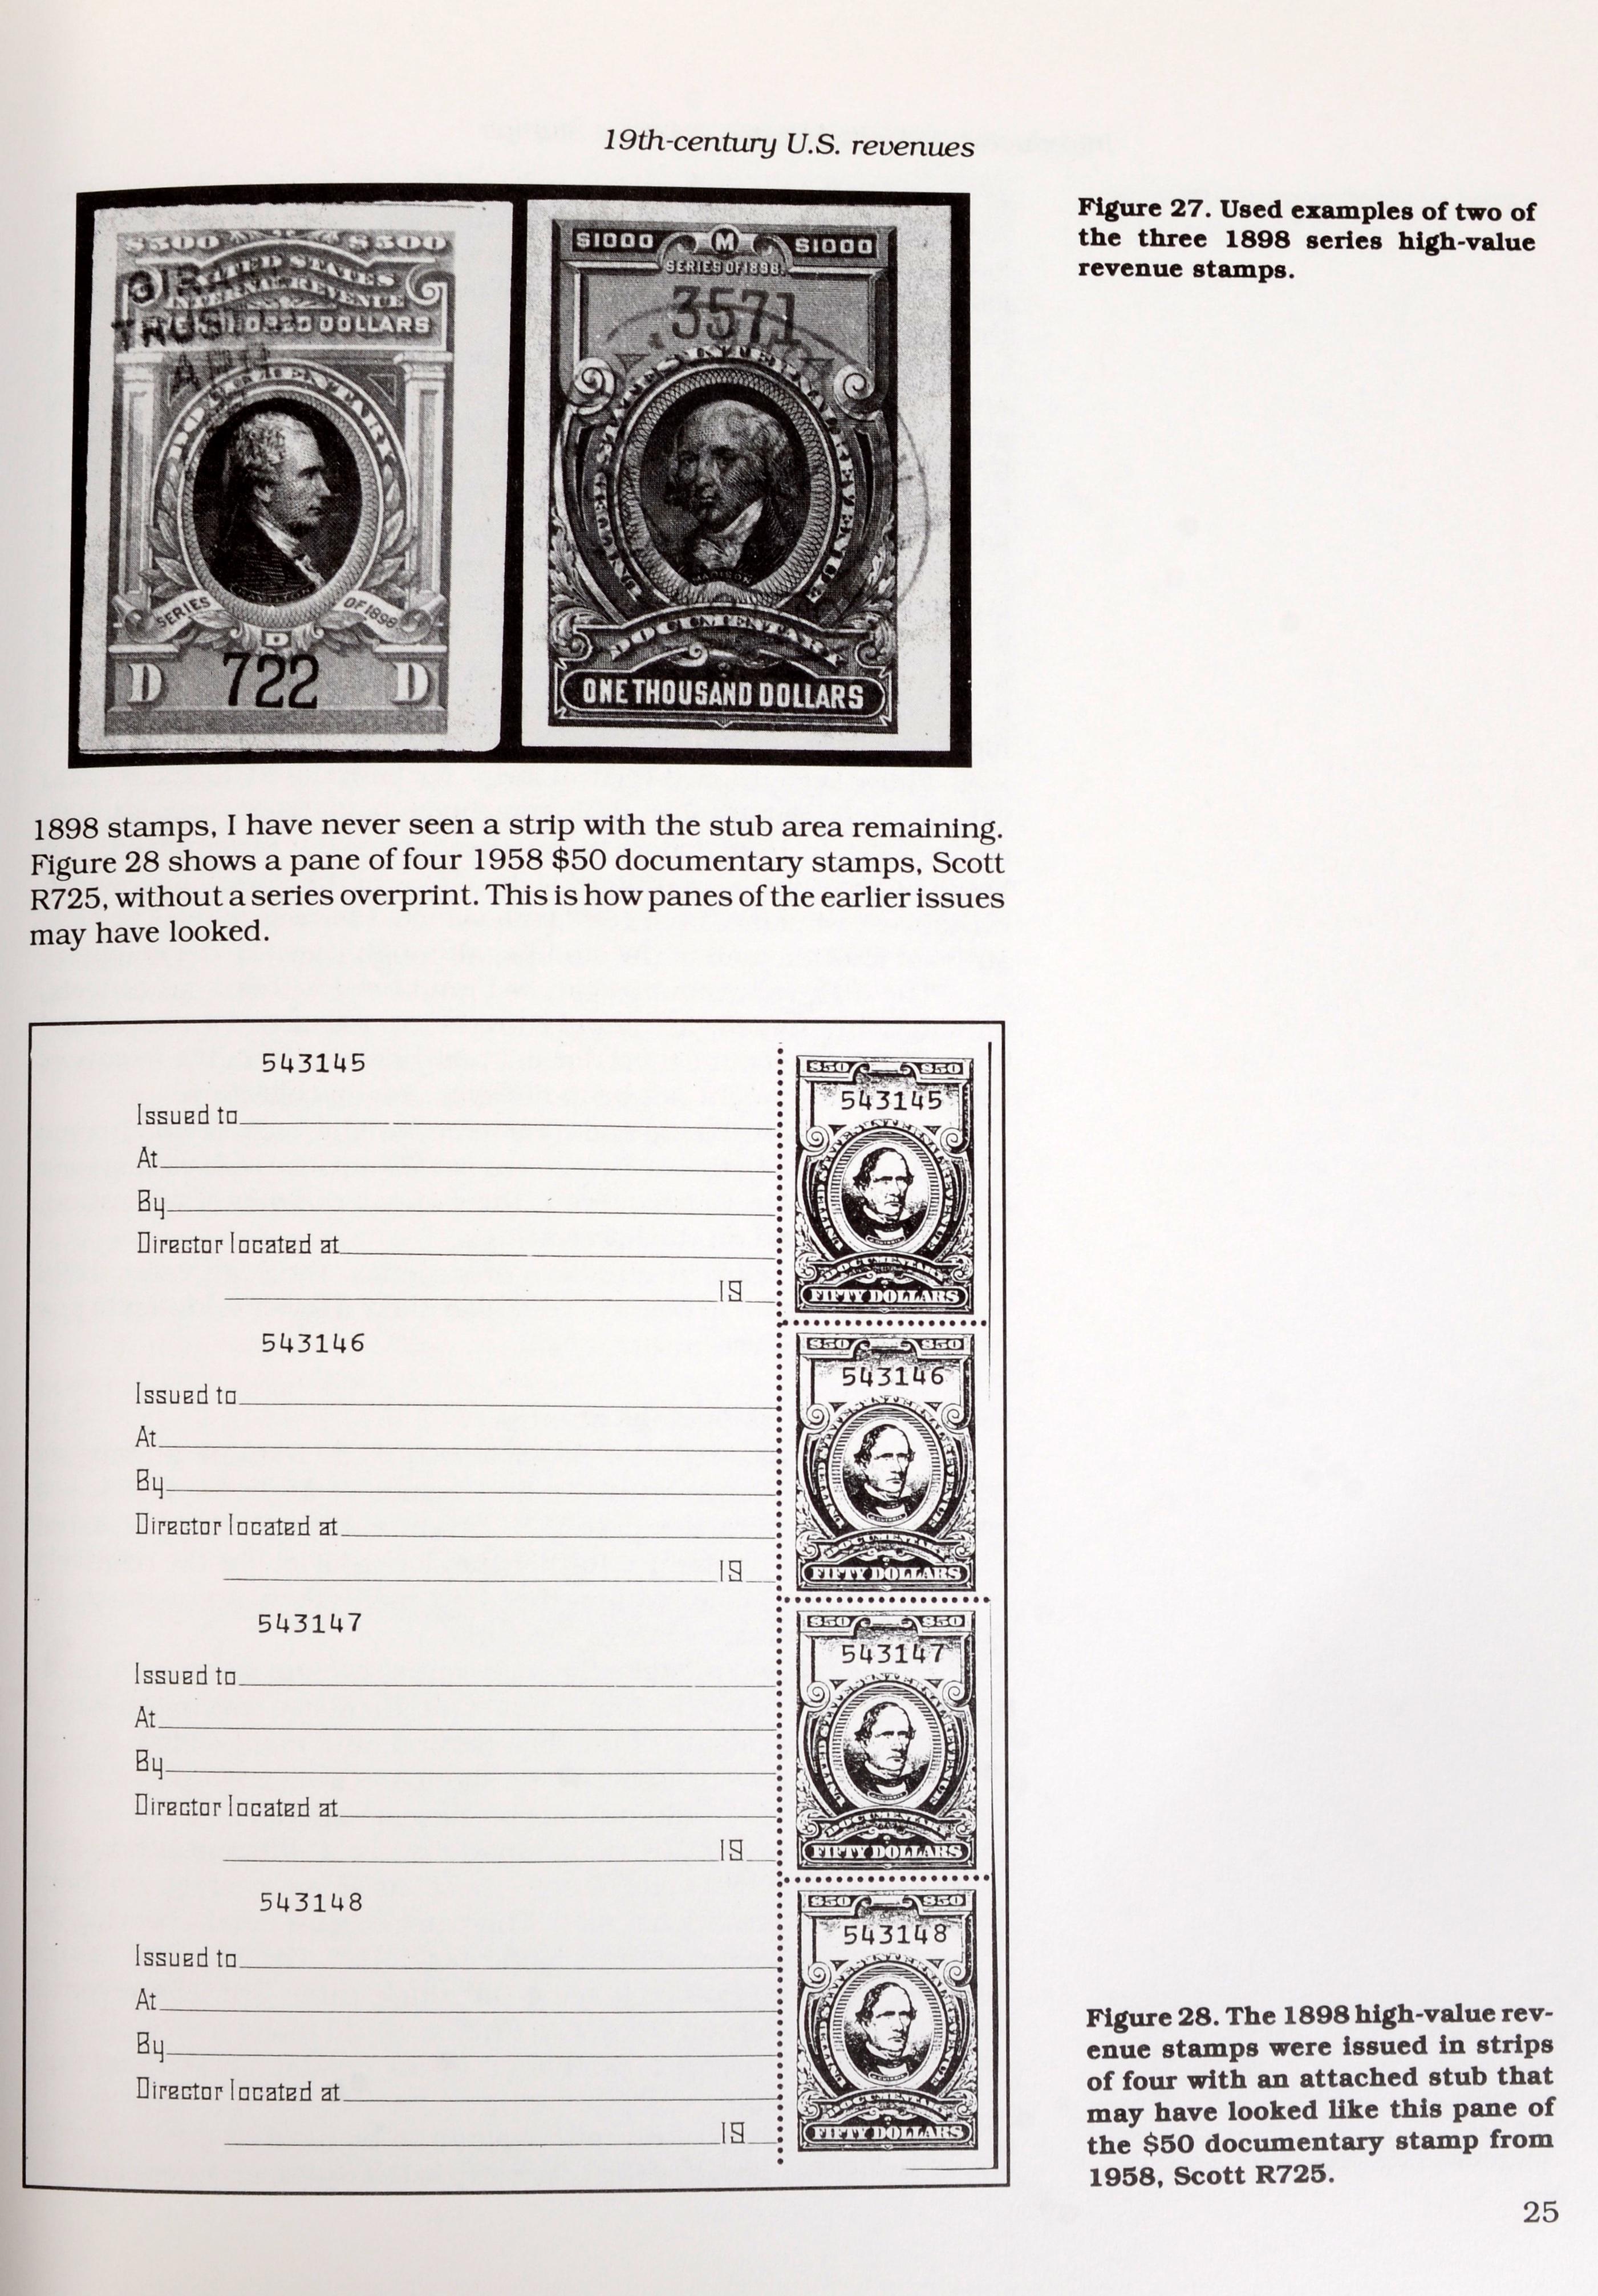 Introduction to United States Revenue Stamps by Richard Friedberg and Classic U.S. Imperforate Stamps by Jon Rose. Published by Linn's Stamp News, 1994/1990. 1st Ed softcover.s Revenue stamp specialist dealer Richard Friedberg wrote a column in